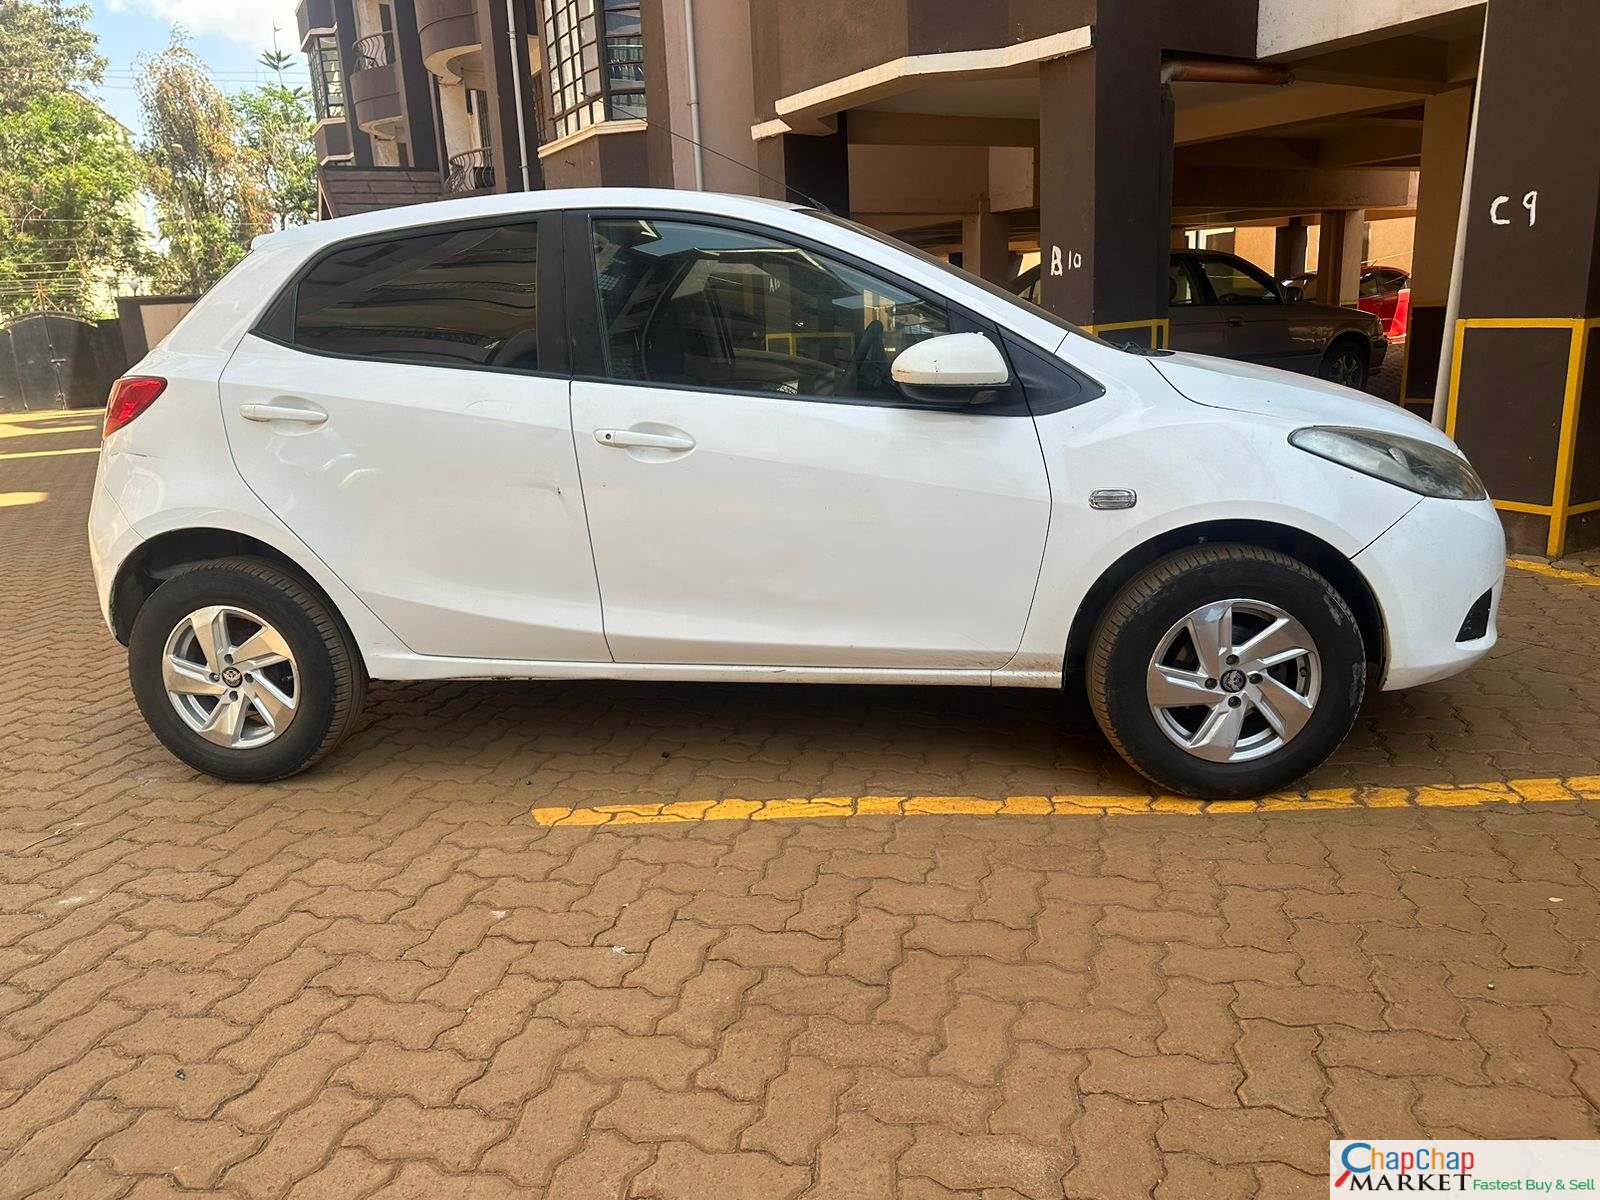 Cars Cars For Sale-Mazda Demio Kenya You Pay 30% DEPOSIT TRADE IN OK demio for sale in kenya hire purchase installments 6